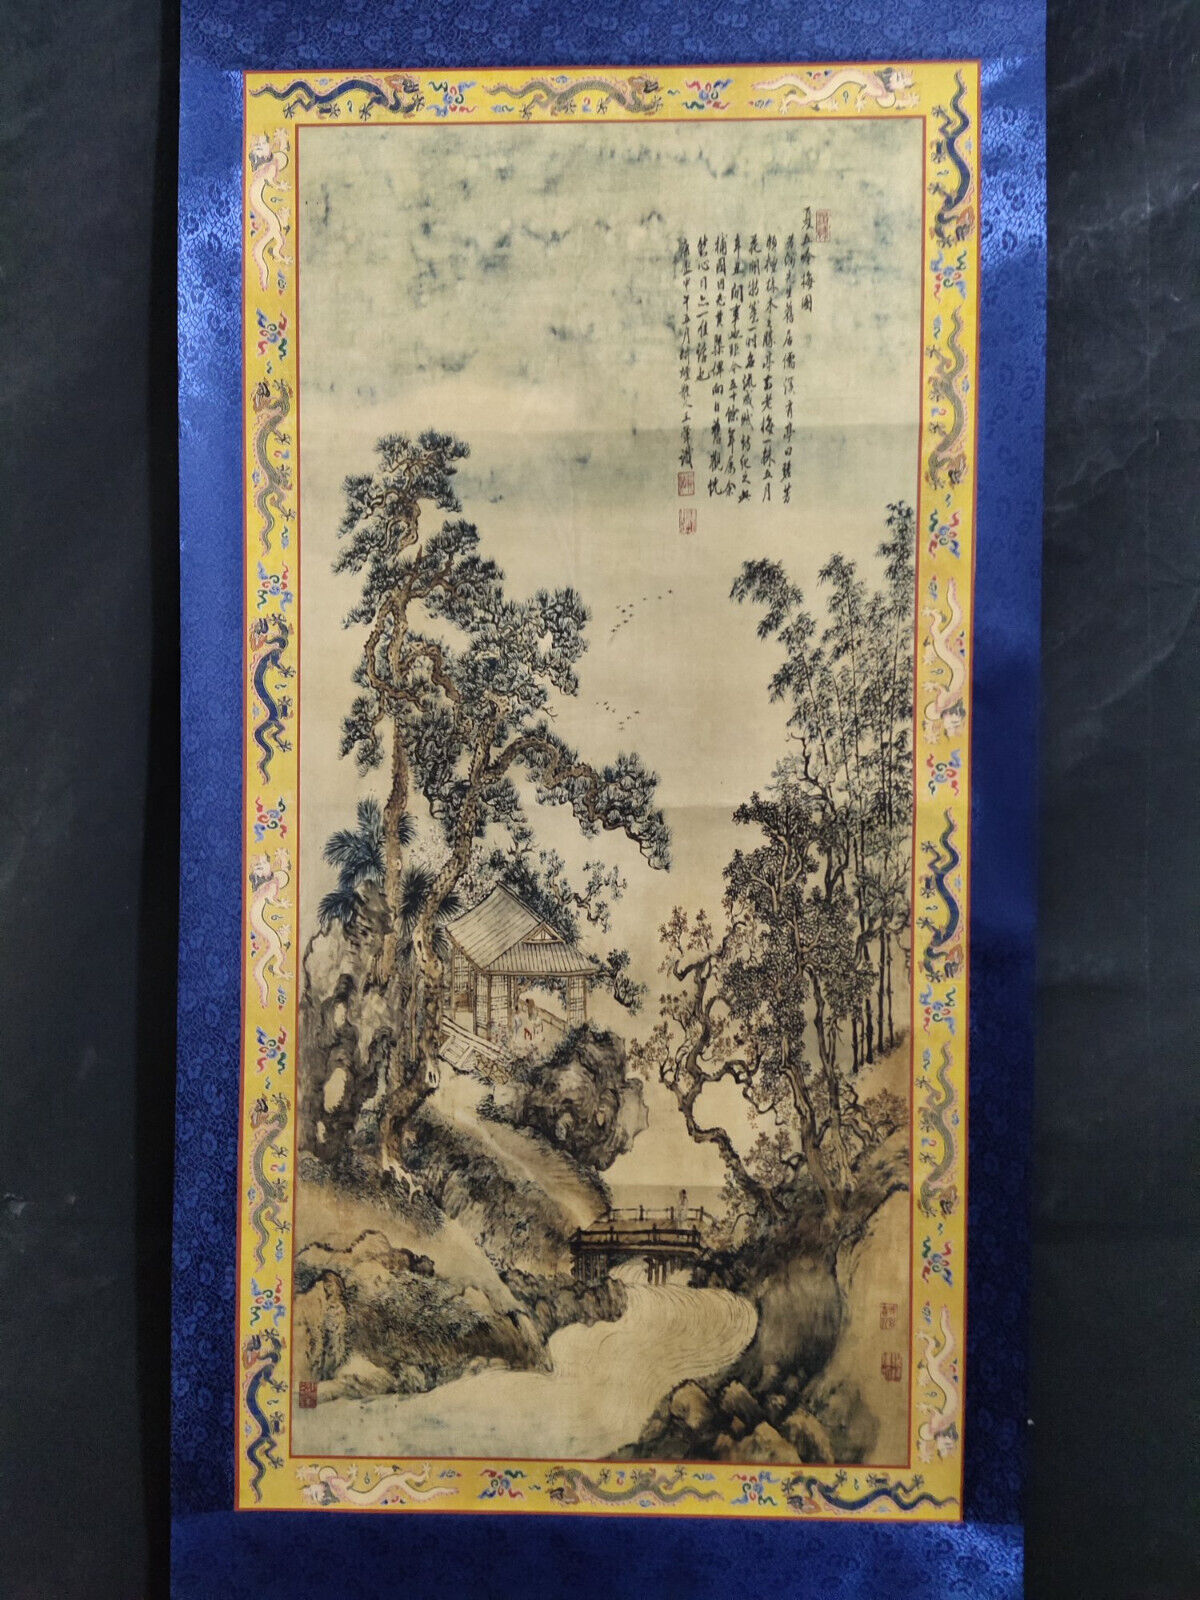 192x70cm Old Chinese Scroll Calligraphy Painting Landscape by Wang Hui 王翚